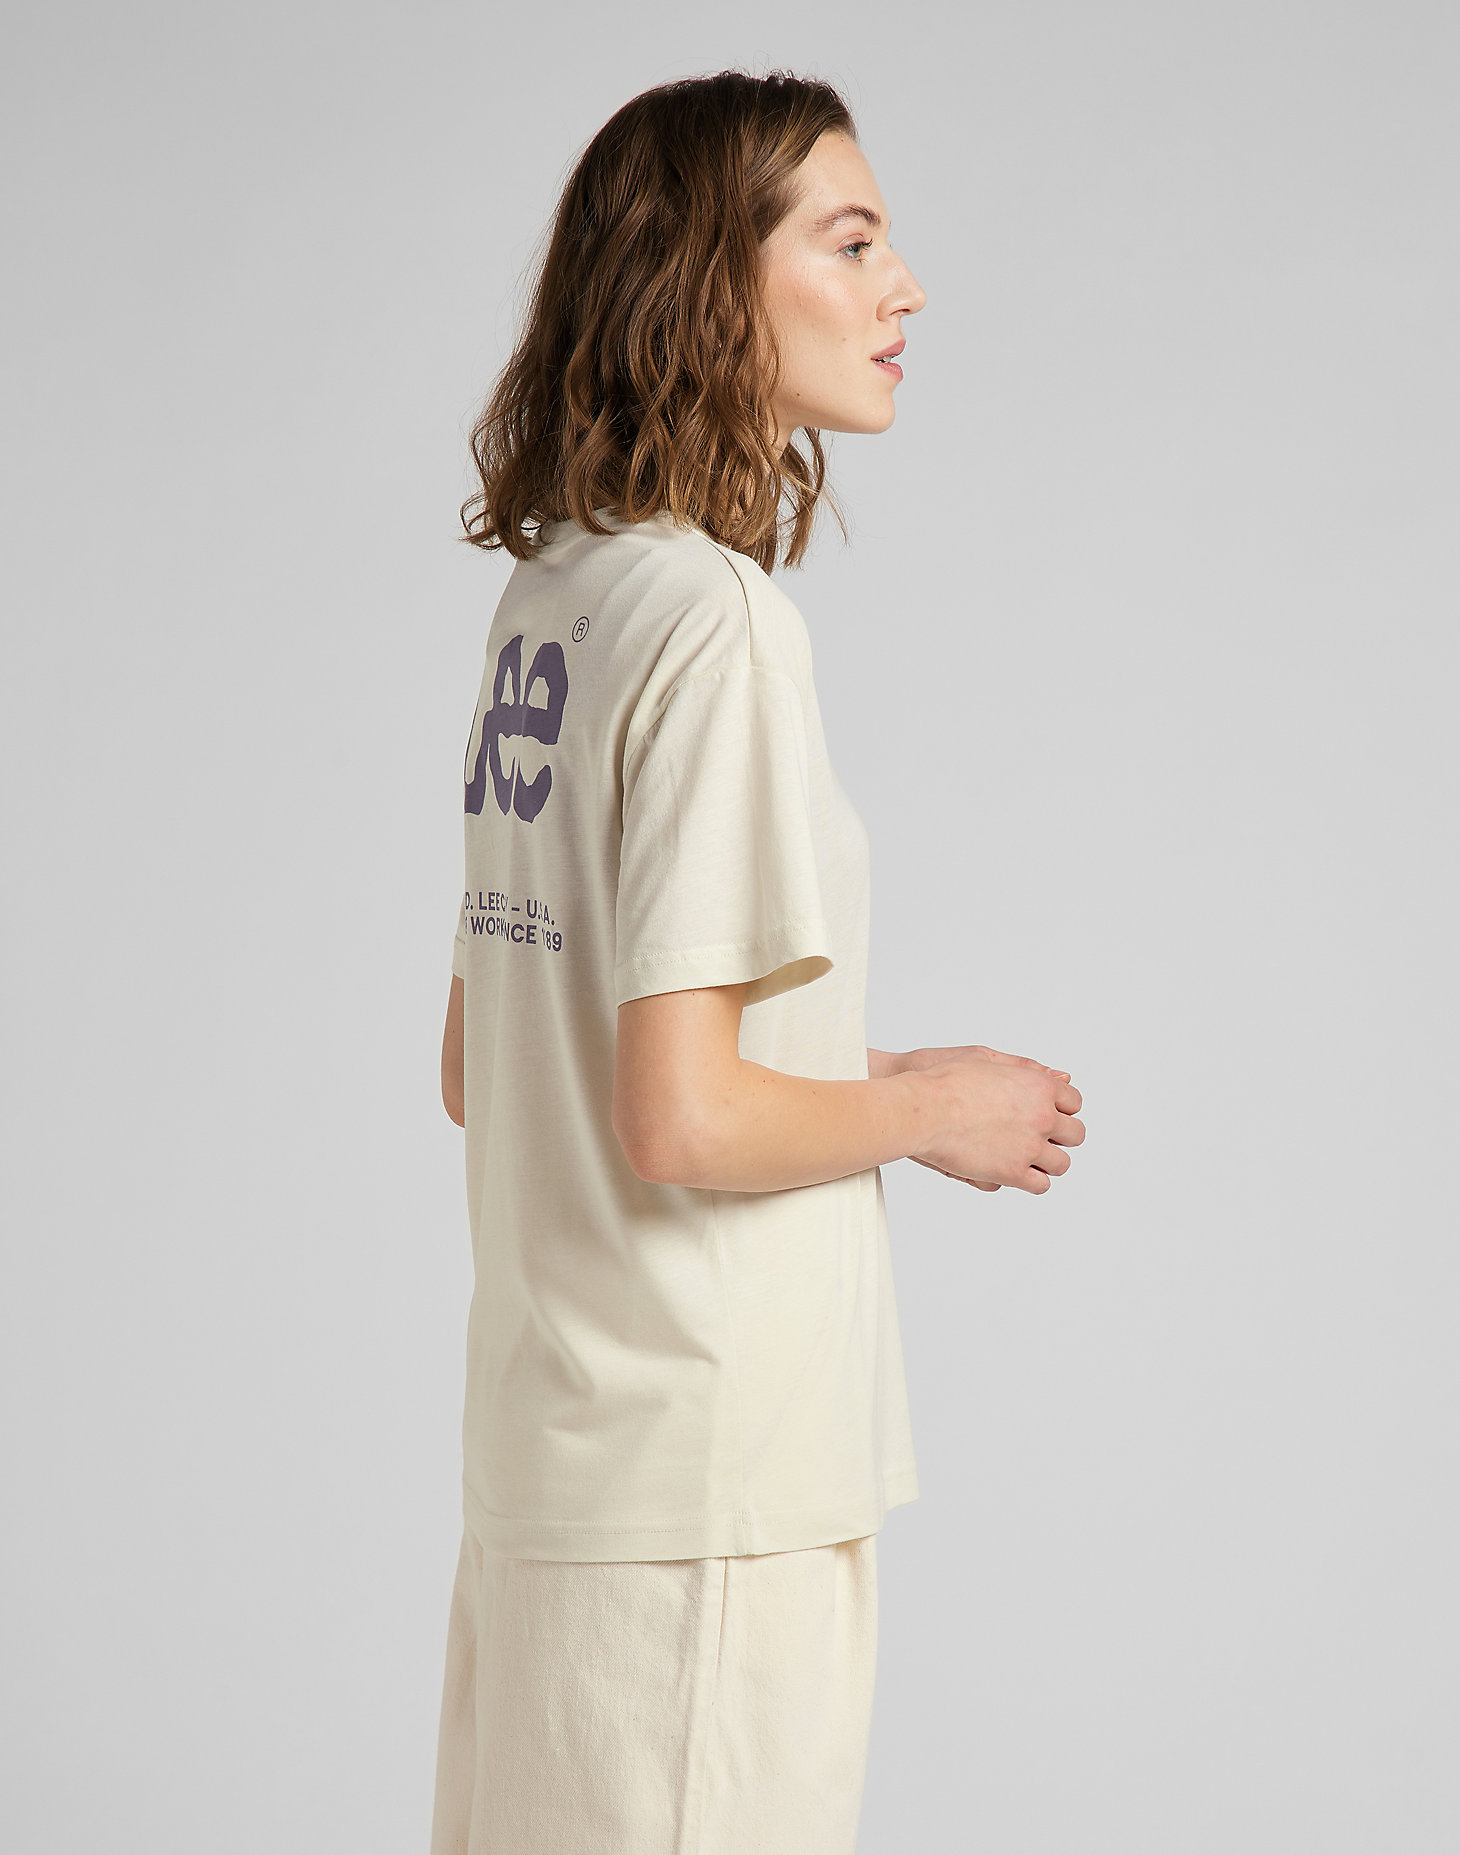 Relaxed Crew Tee in Workwear White alternative view 4